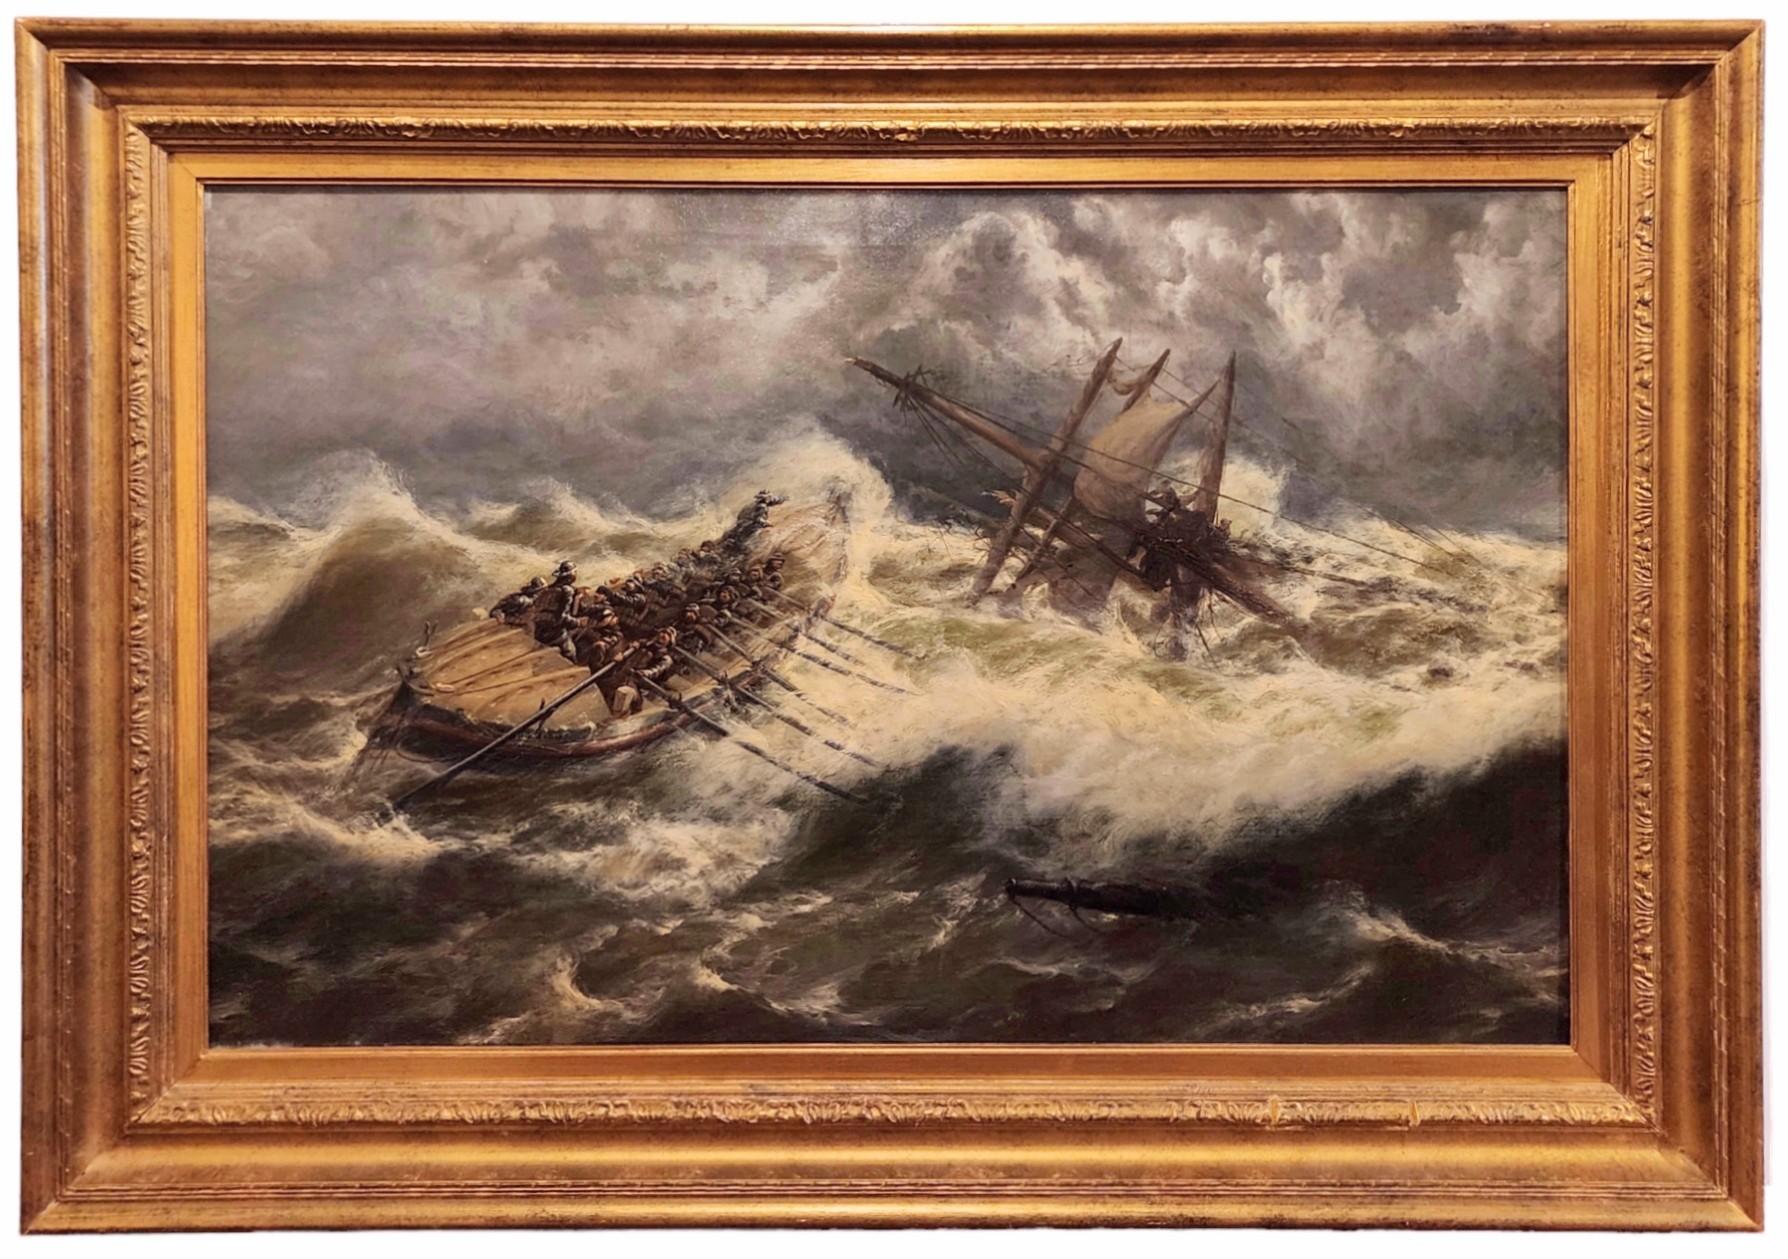 Striving Hard to Reach the Wreck, British Seascape, Sinking Ship, Rescue - Painting by Thomas Rose Miles